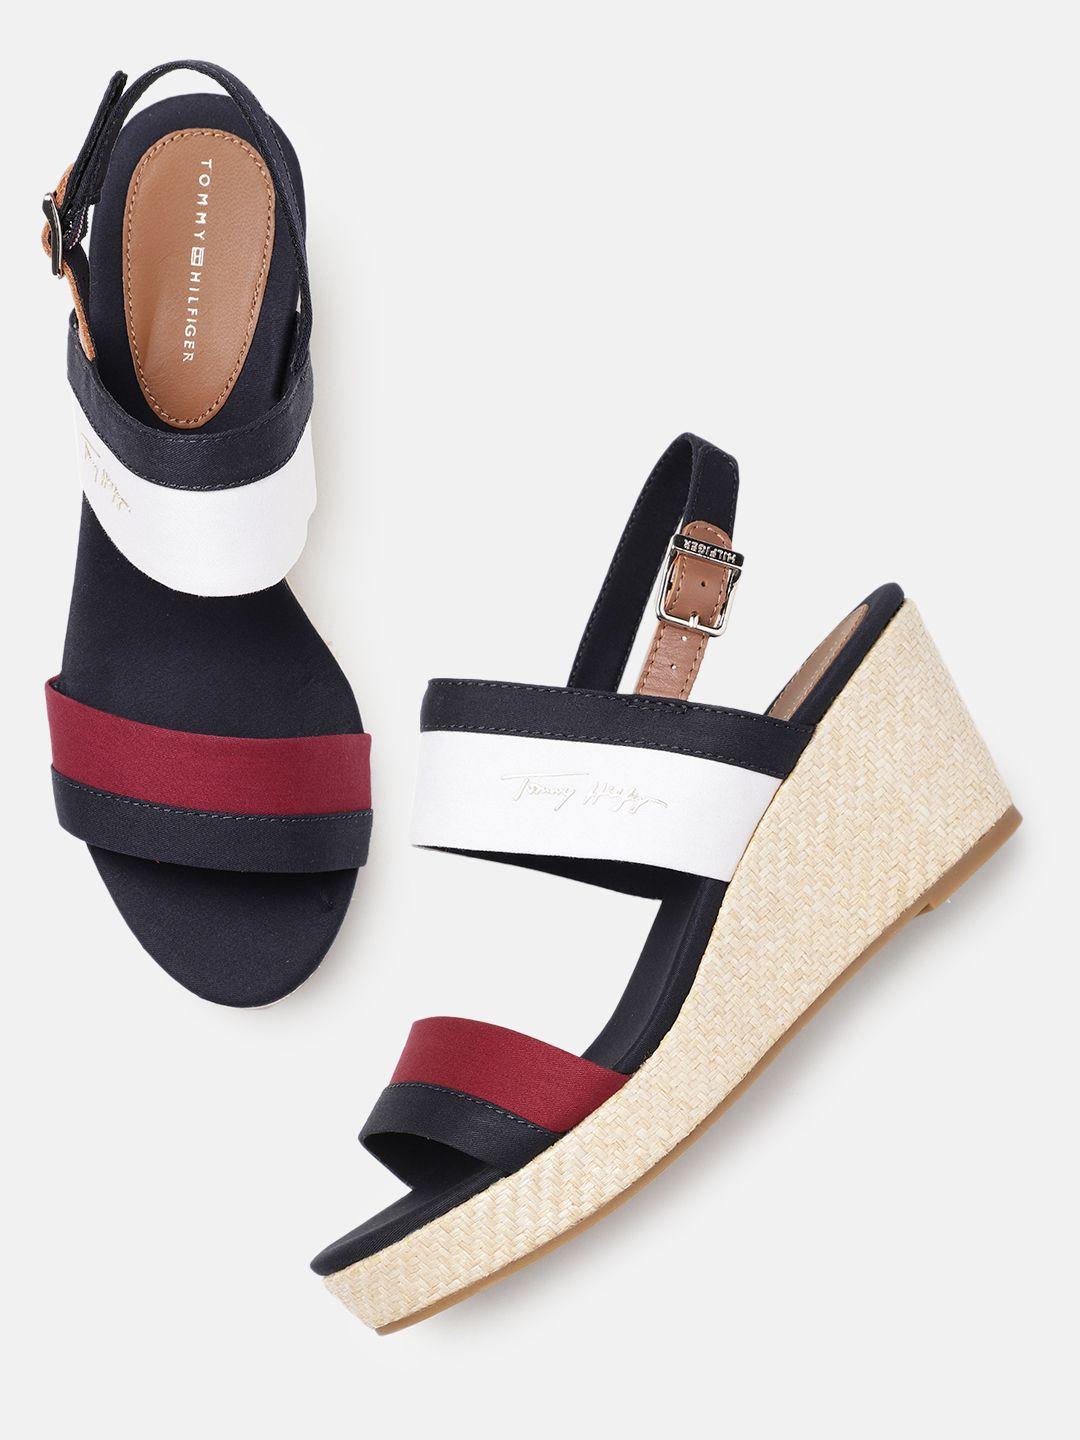 tommy hilfiger colourblocked wedges with back strap